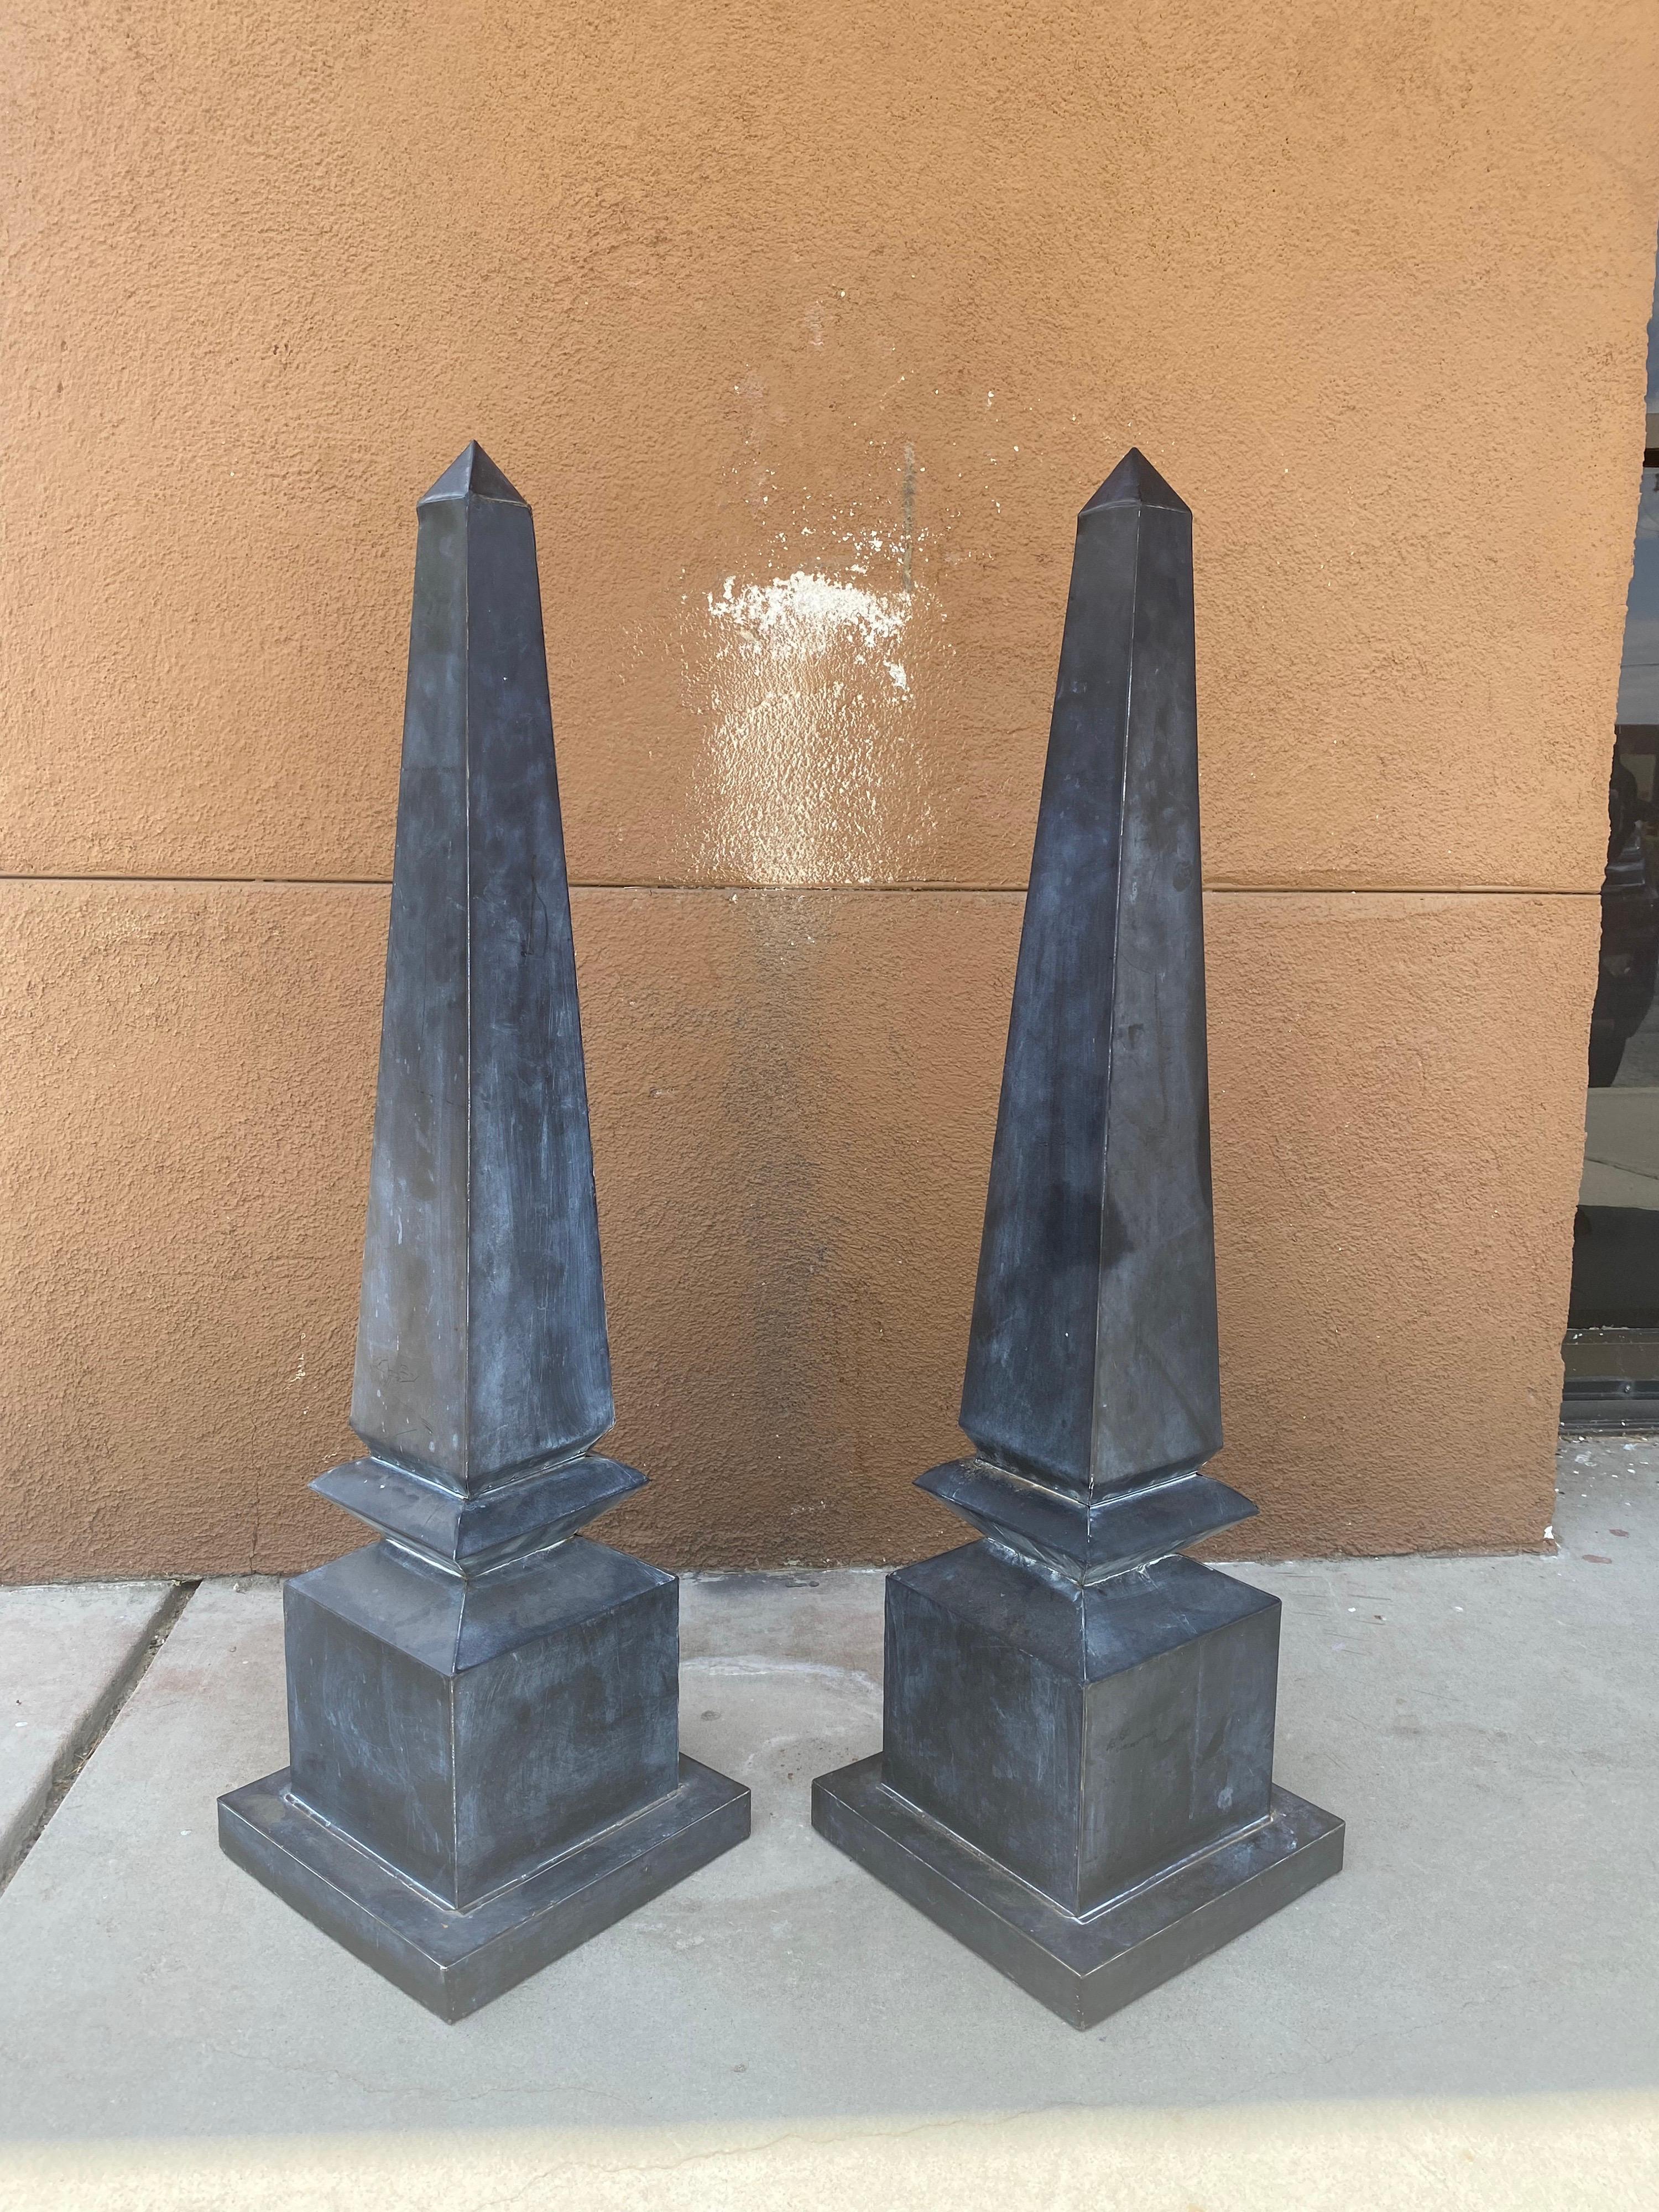 We found these beautiful large obelisks in a landscape design of a MAJOR regency style Beverly Hills home.. (think movie mogul John Elgin Woolf estate and you got the look!) I believe them to be custom-made. Dark gray or light black beautiful all